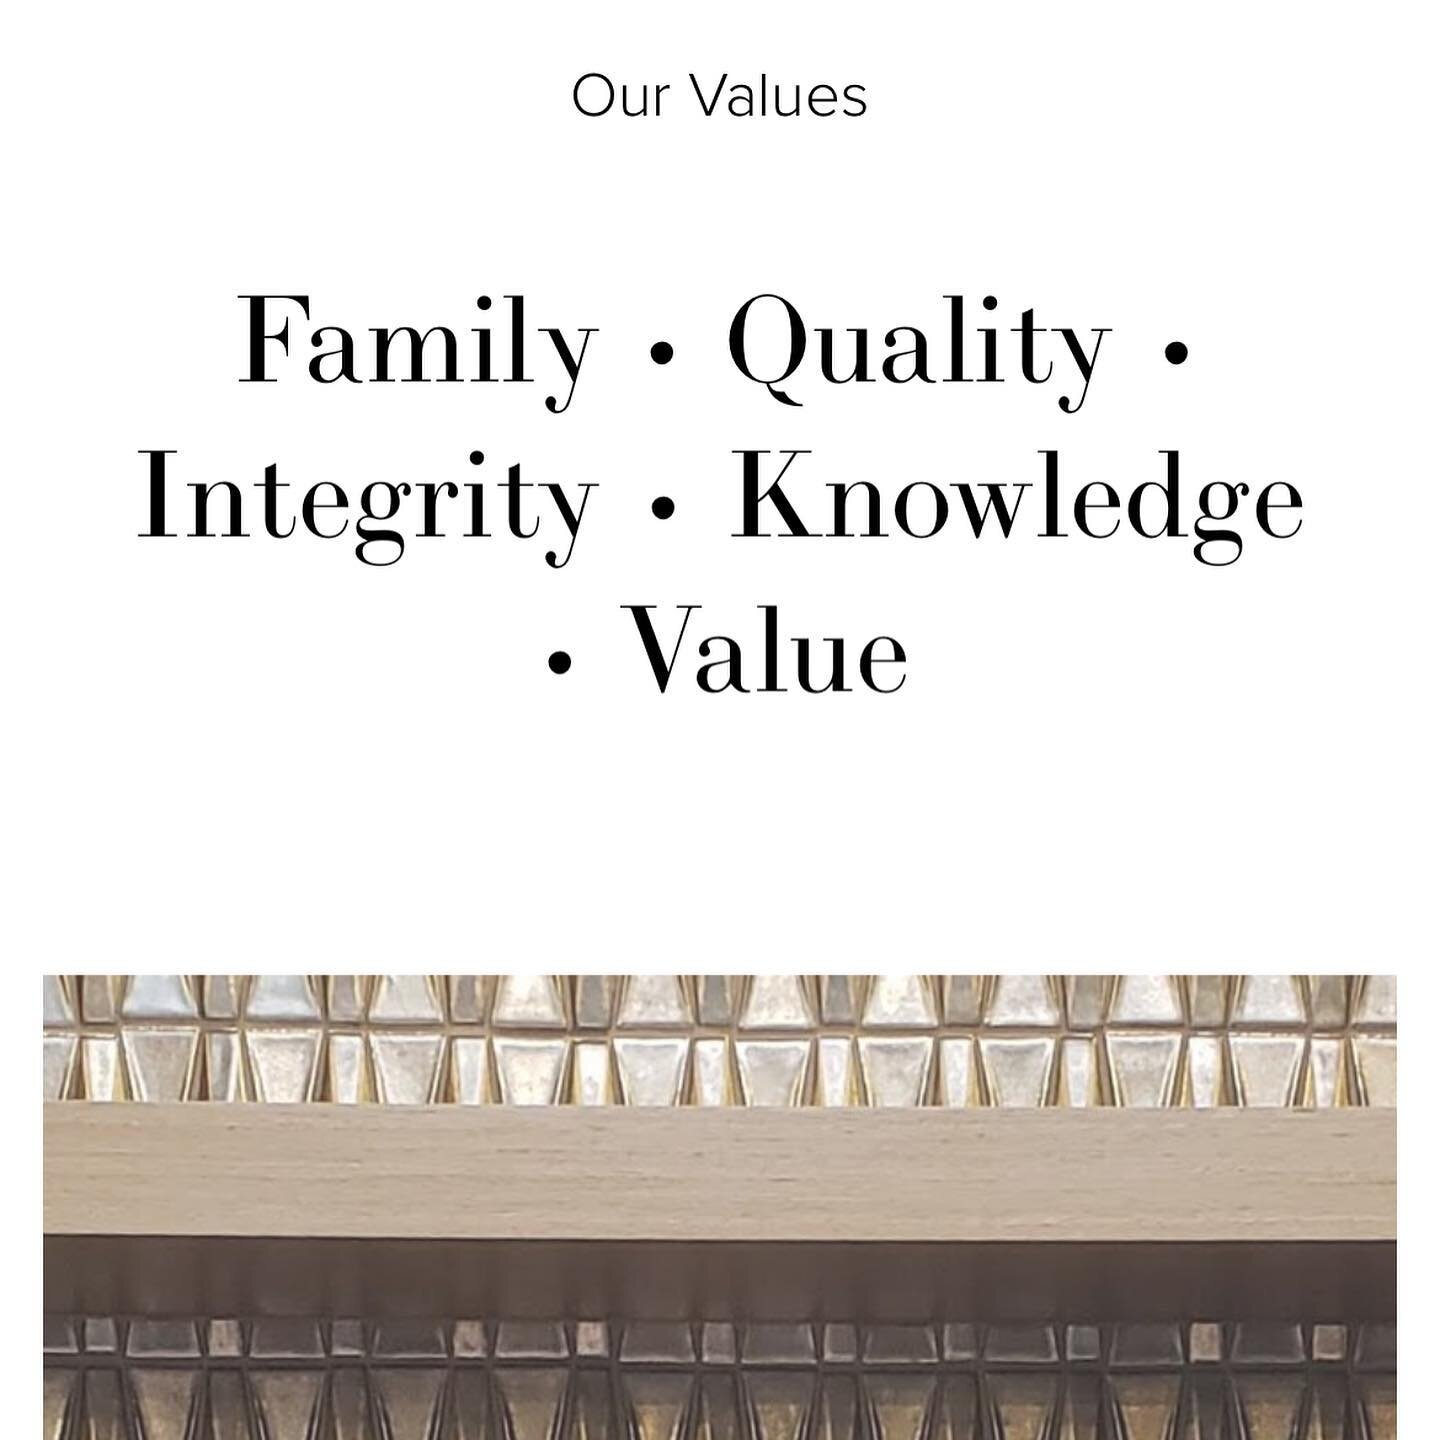 Check out our new website! Just released today!

We created this website so you can learn more about our values, our team, and our methods. 

As a family run business, we know a lot goes into selecting the right crew to come into your home, beyond ju